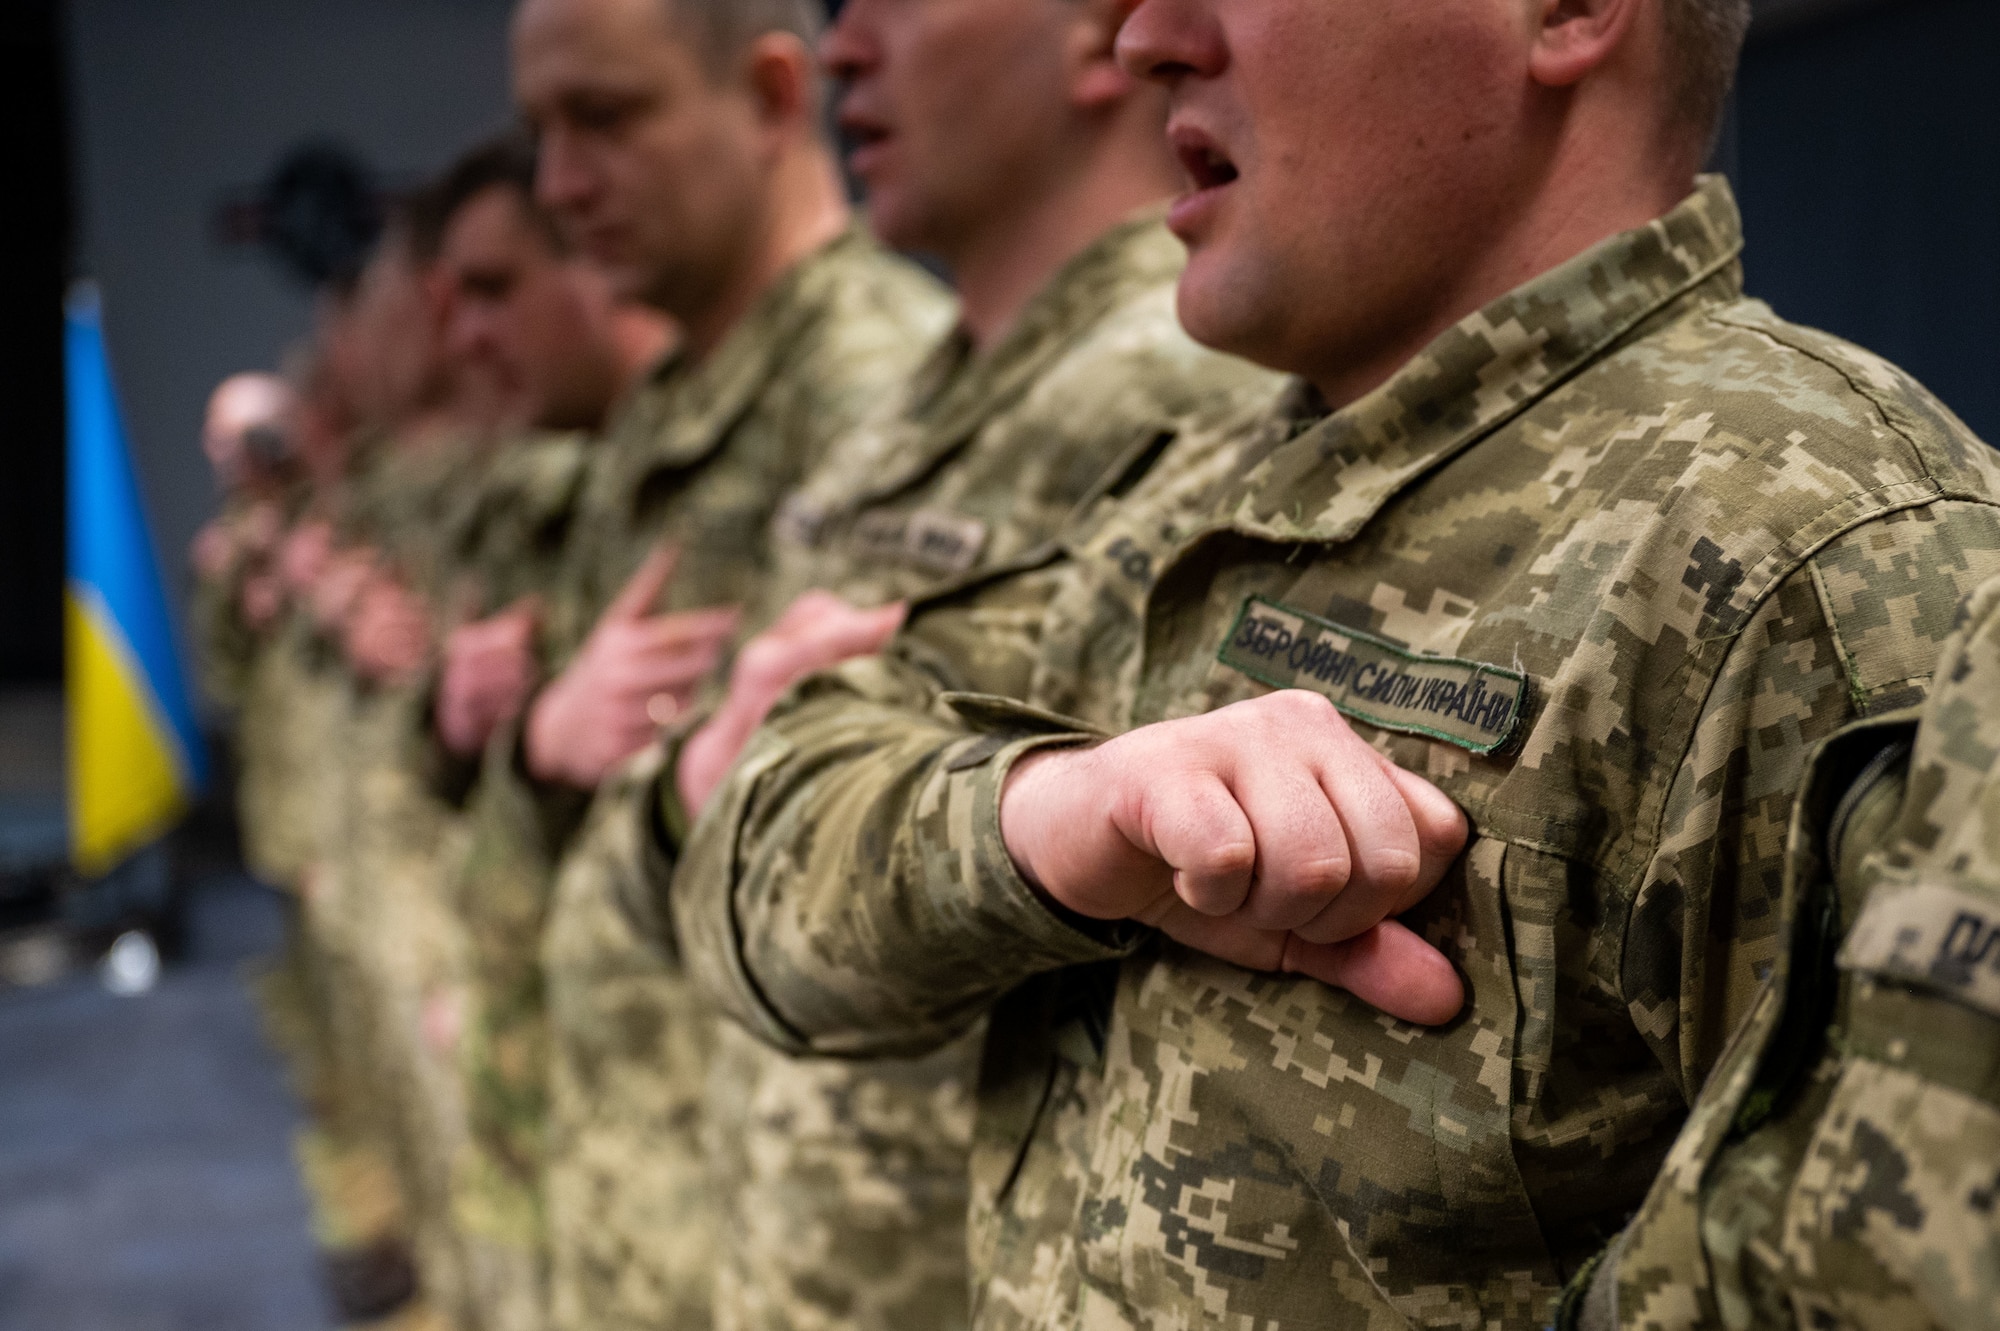 Ukrainian Air Force members sing along to their national anthem at the Inter-European Air Force Academy at Kapaun Air Station, Germany, March 16, 2023. IEAFA’s professional military education is a combined experience with students from Squadron Officer School and Noncommissioned Officer Academy learning alongside one another. (U.S. Air Force photo by Tech. Sgt. Steven Adkins)